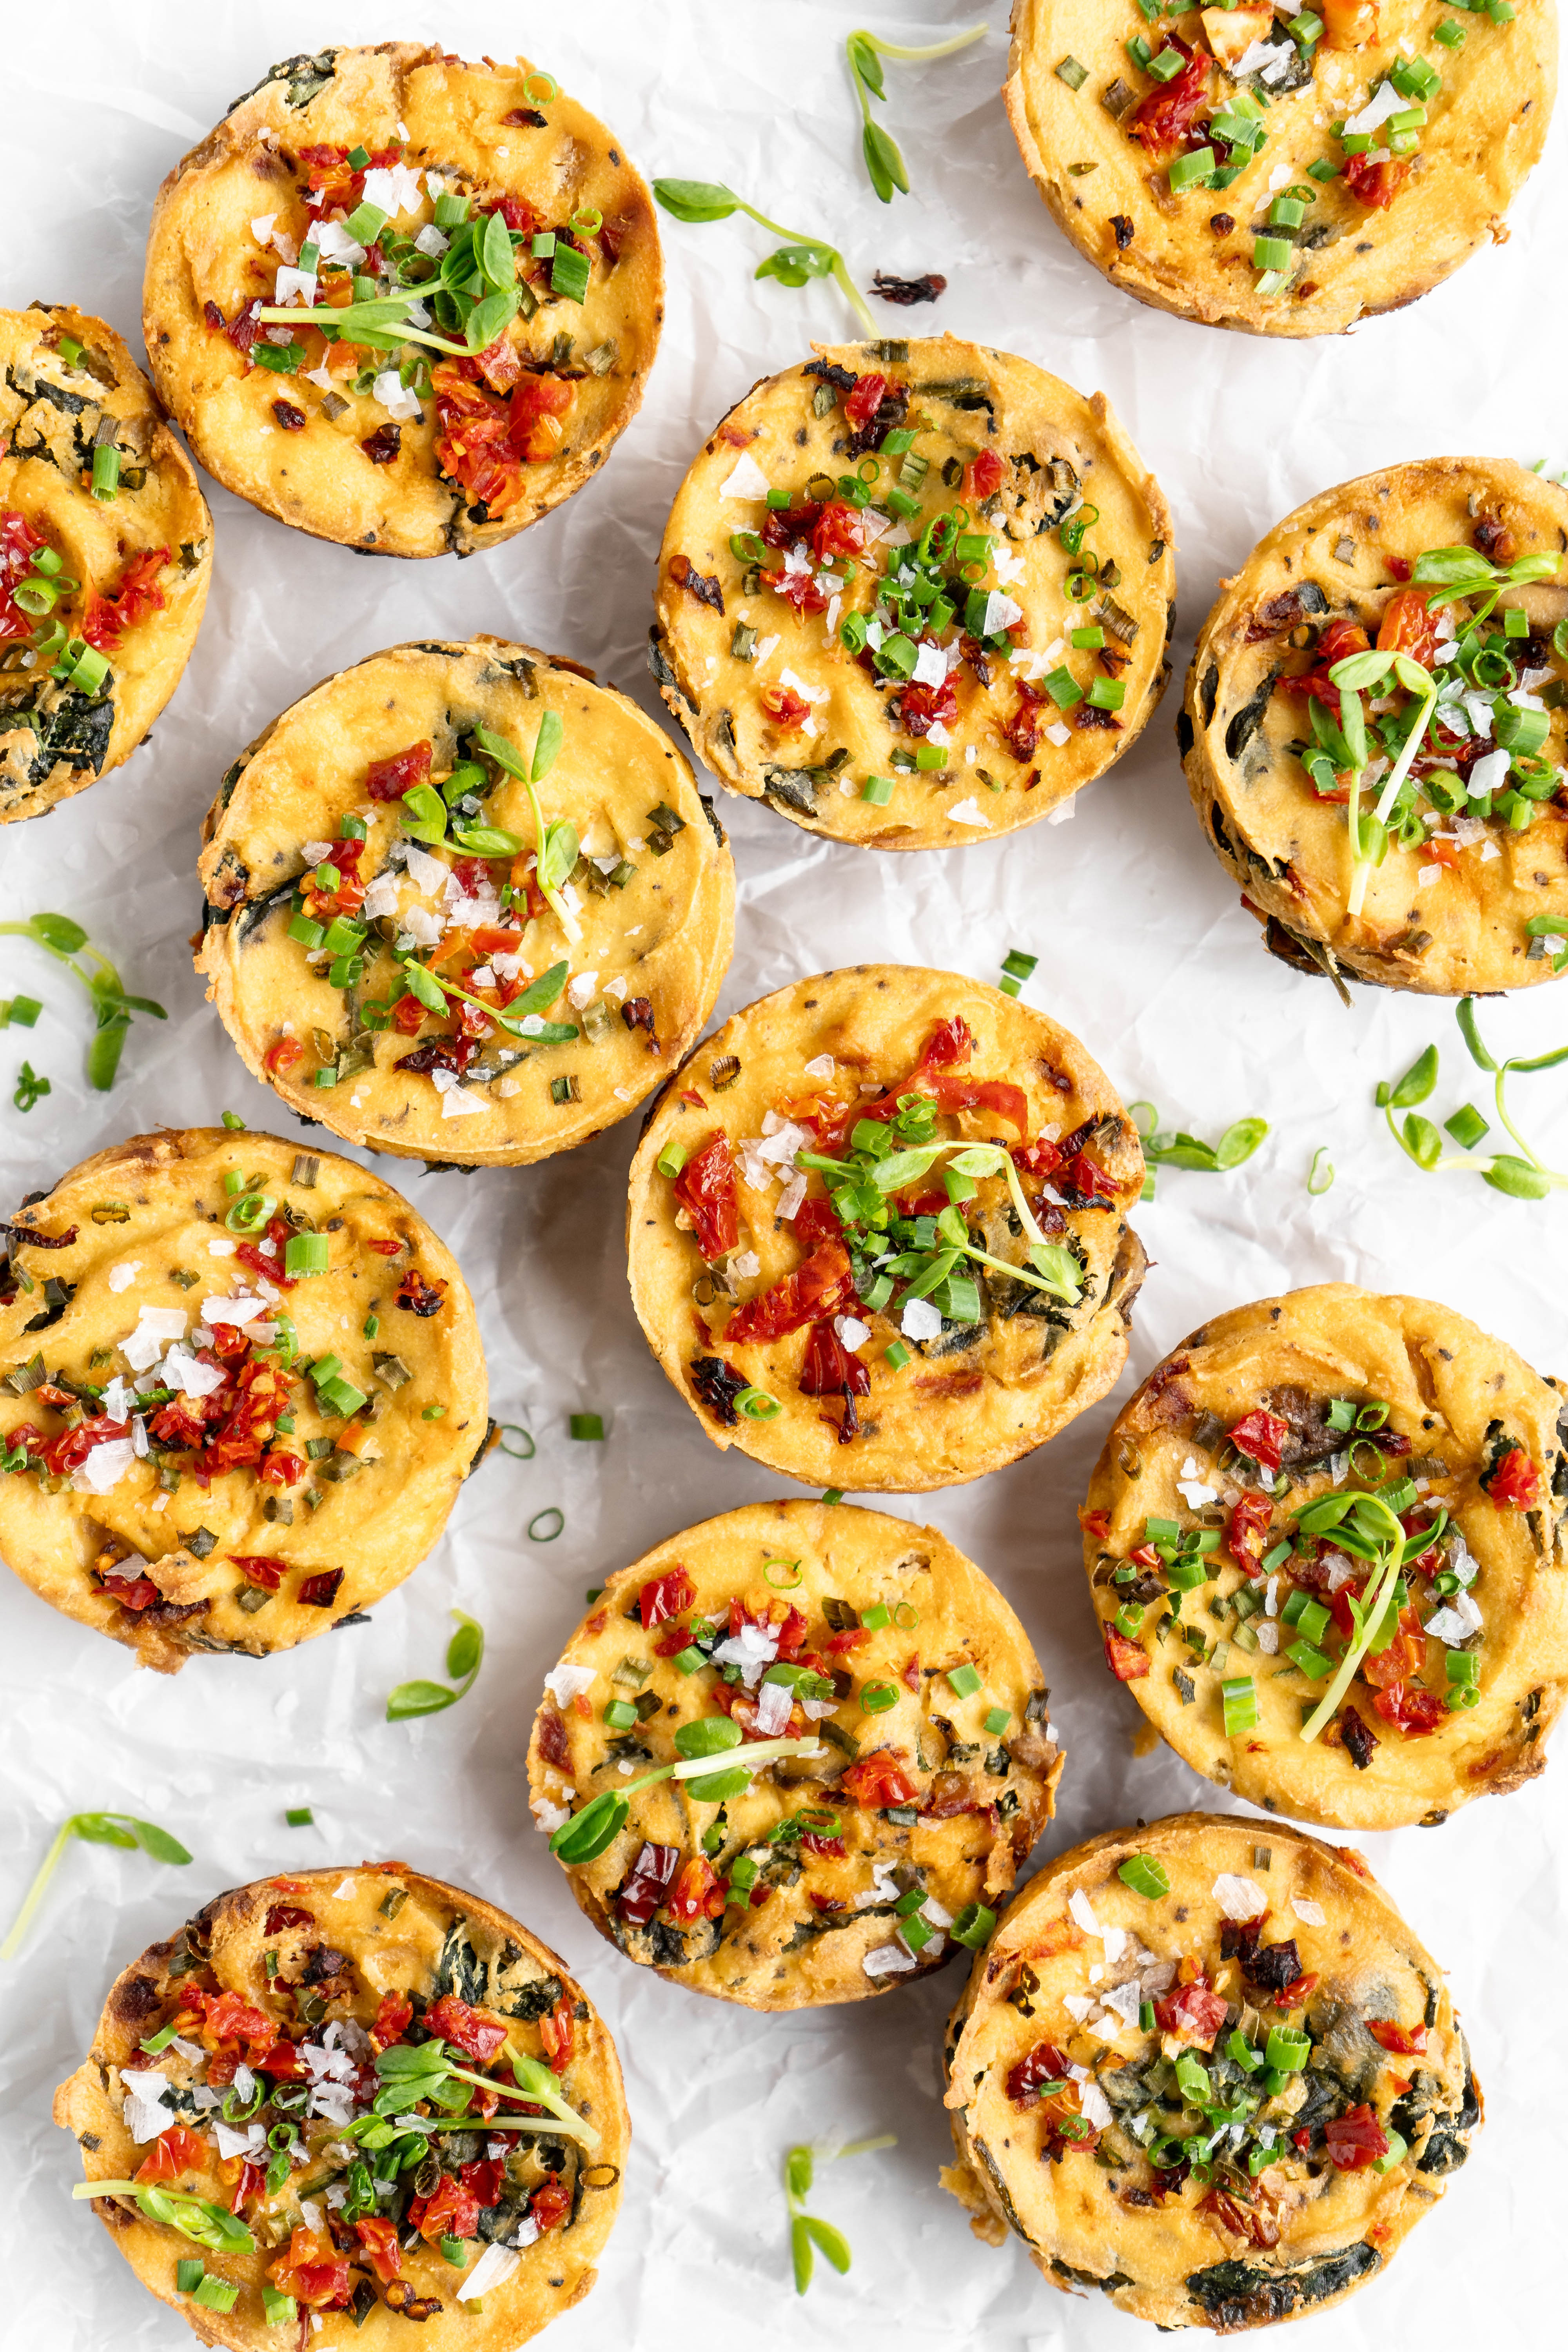 Vegan quiche muffins with garnishes on parchment paper